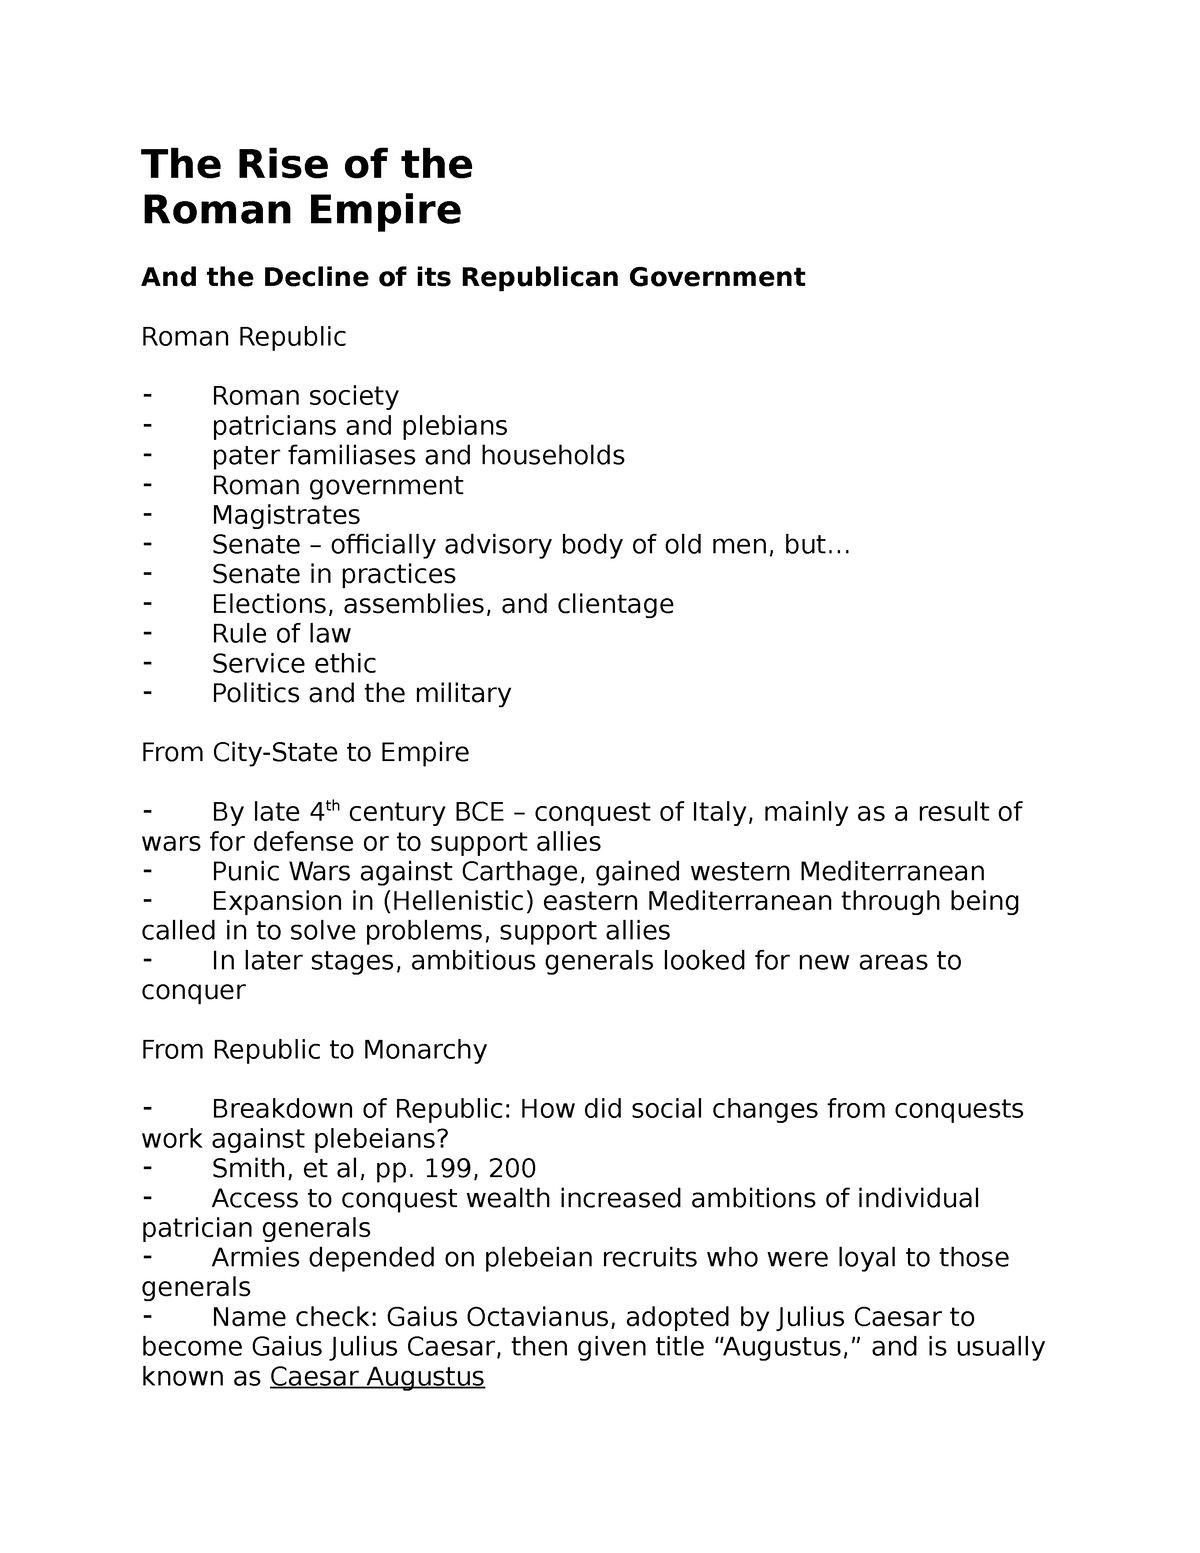 essay on the rise and fall of the roman empire